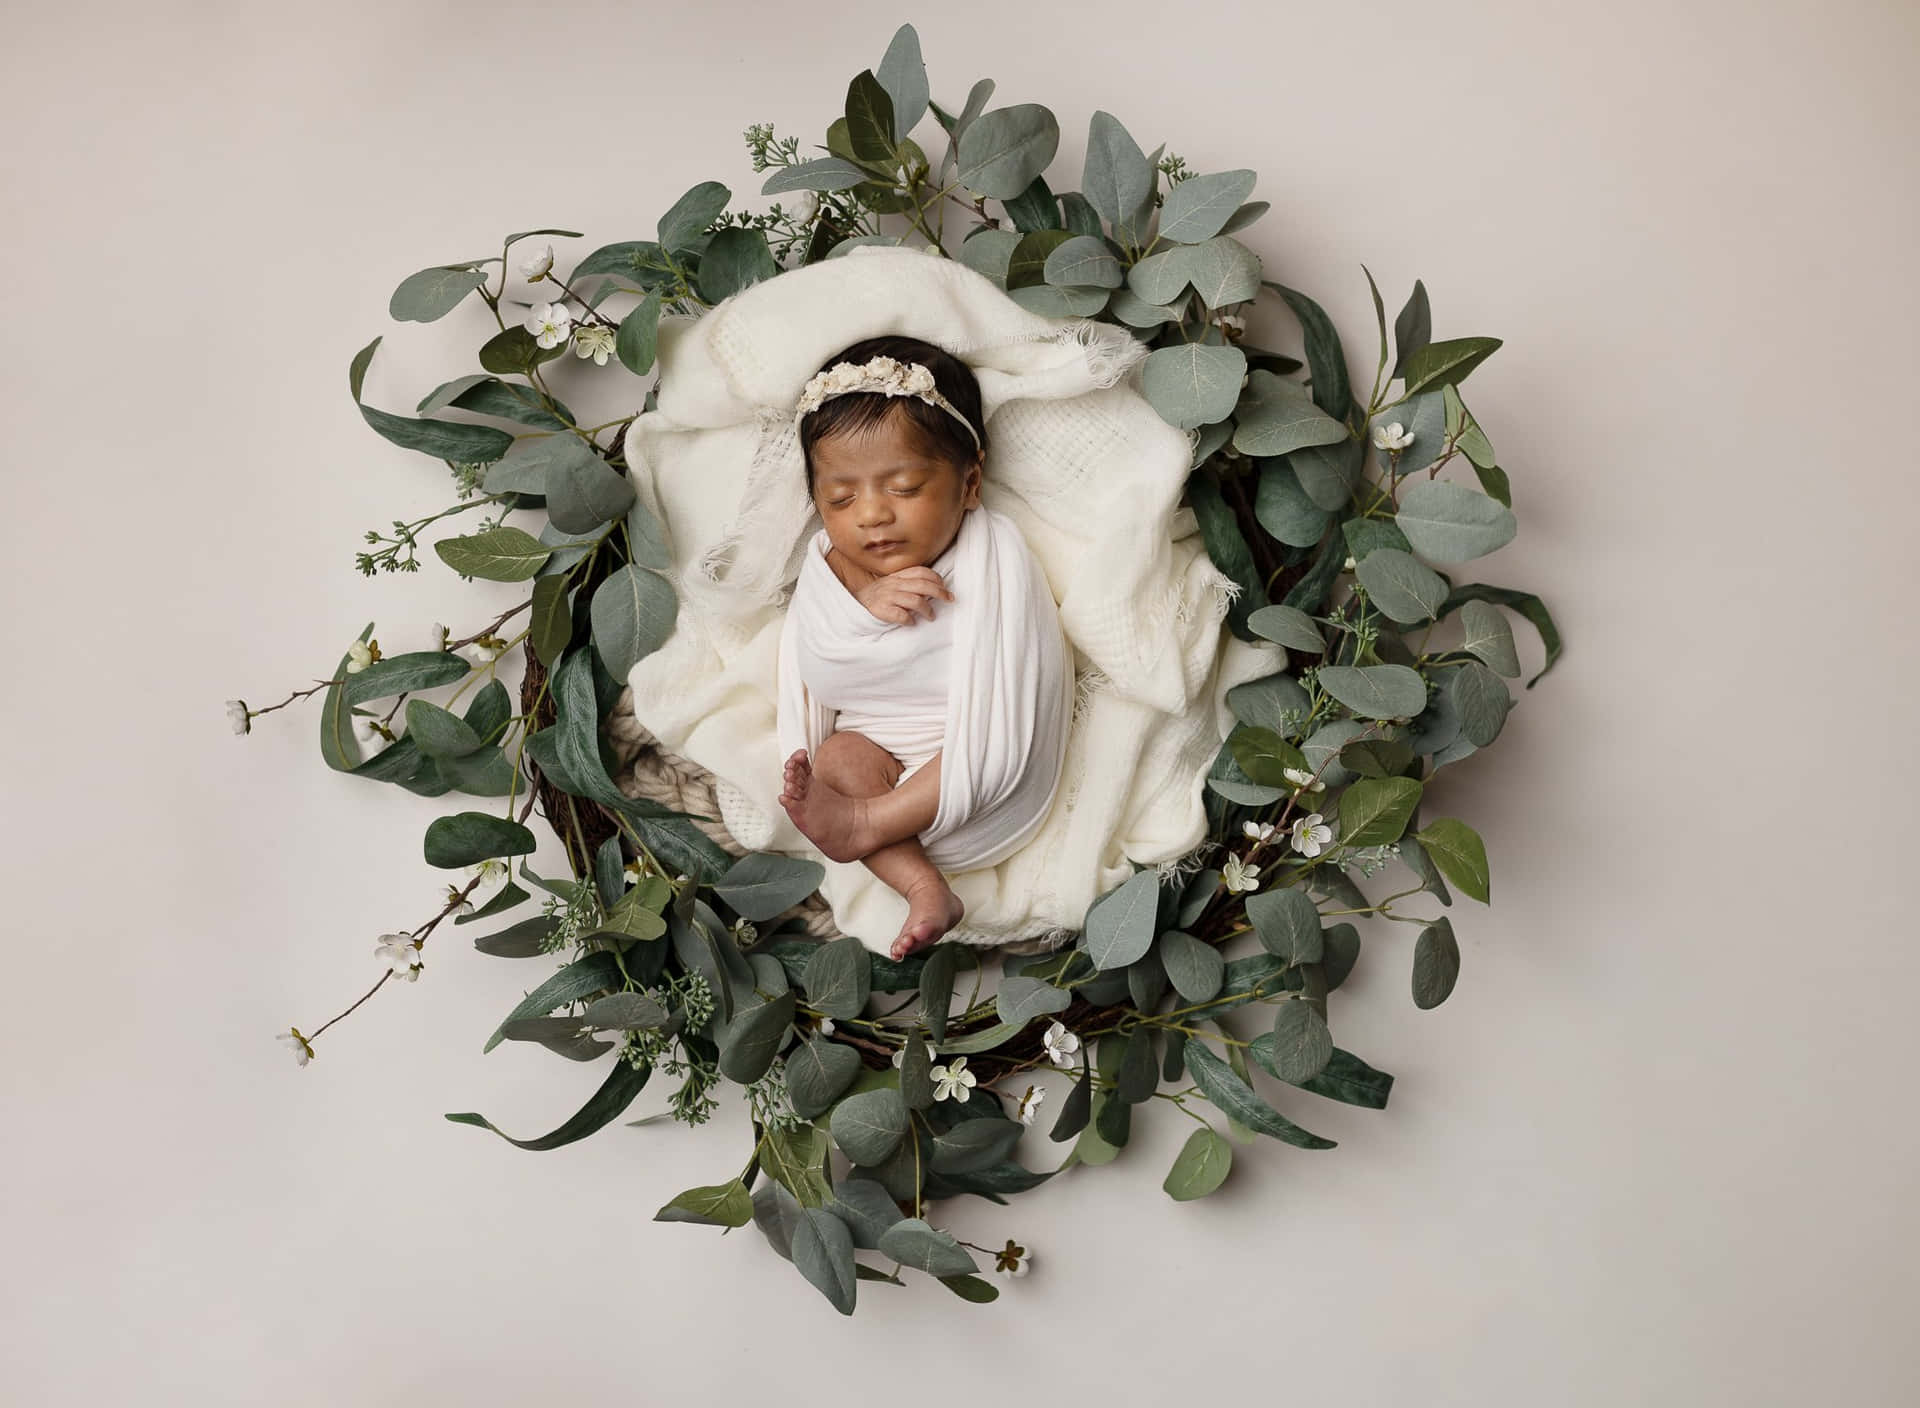 A Newborn Girl Is Laying In A Wreath Of Eucalyptus Leaves